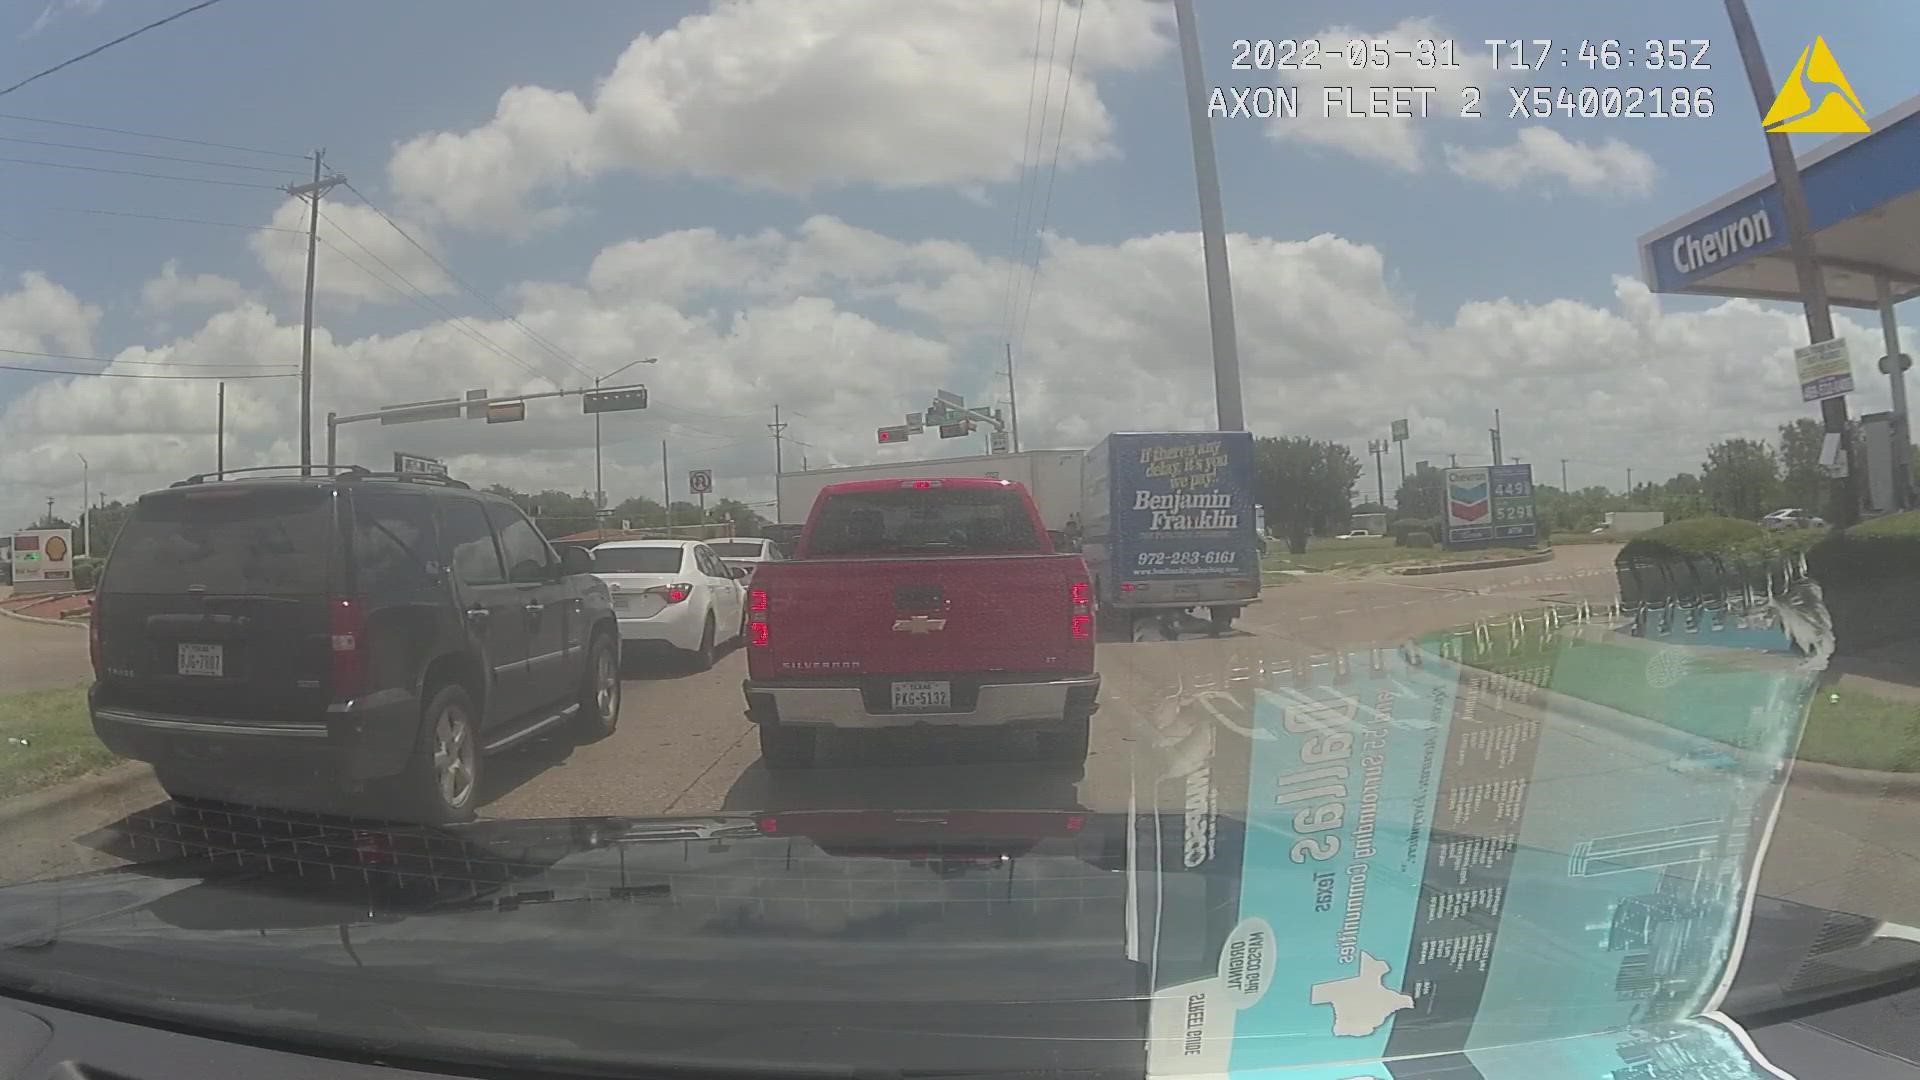 Video from the Dallas County Sheriff's Office shows a mother tracking down a deputy in traffic. The deputy can then be heard saving the woman's daughter with CPR.